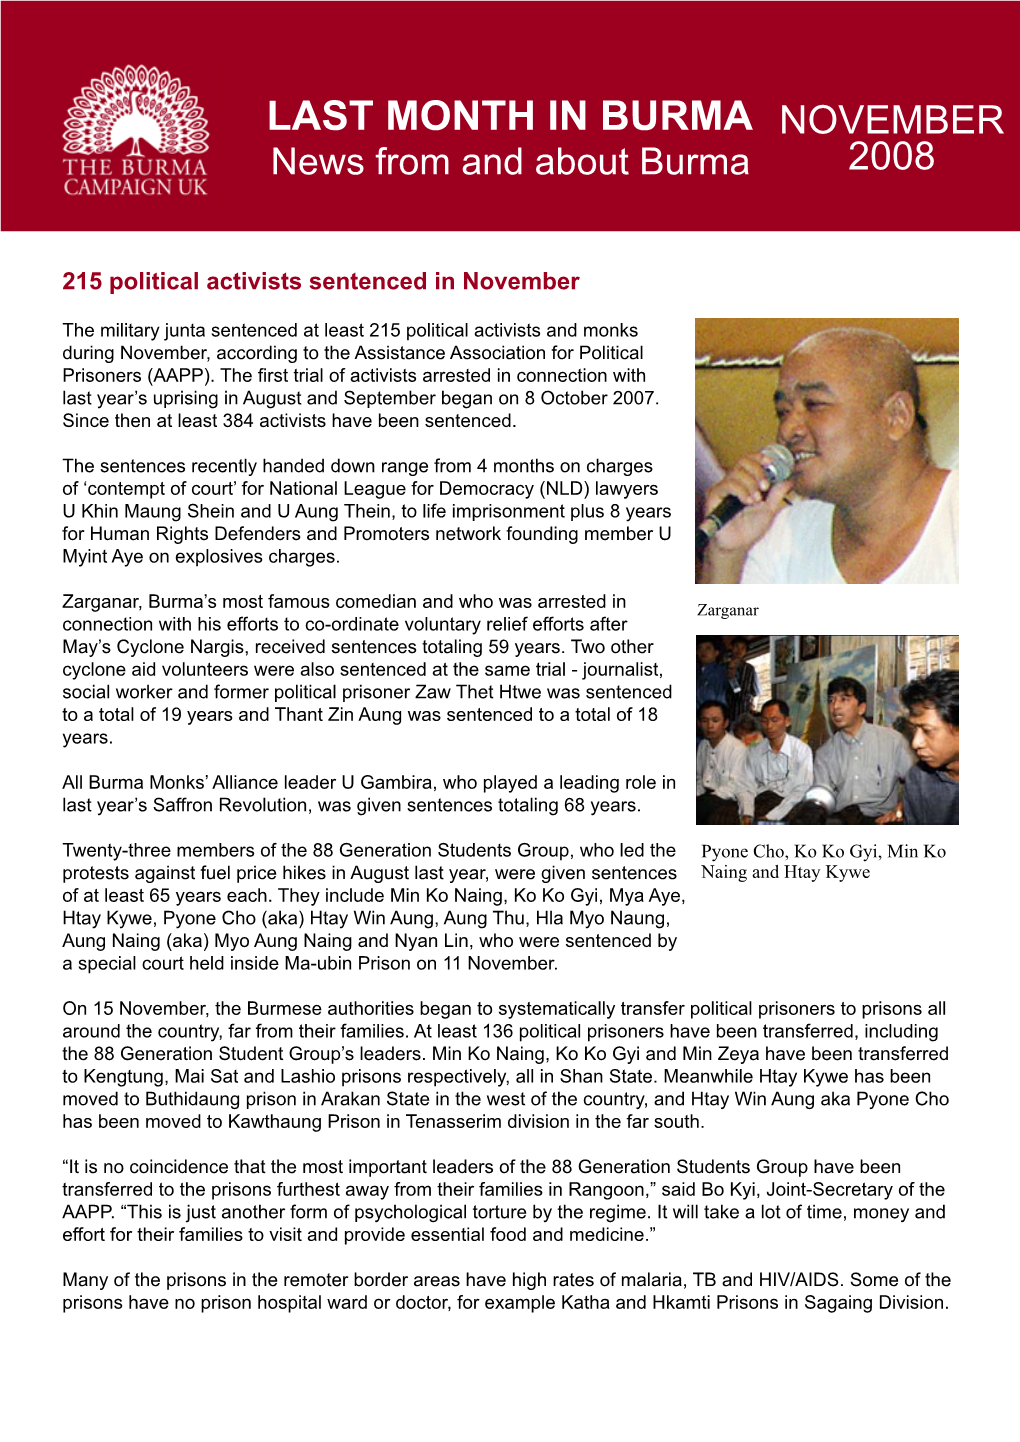 LAST MONTH in BURMA NOVEMBER News from and About Burma 2008